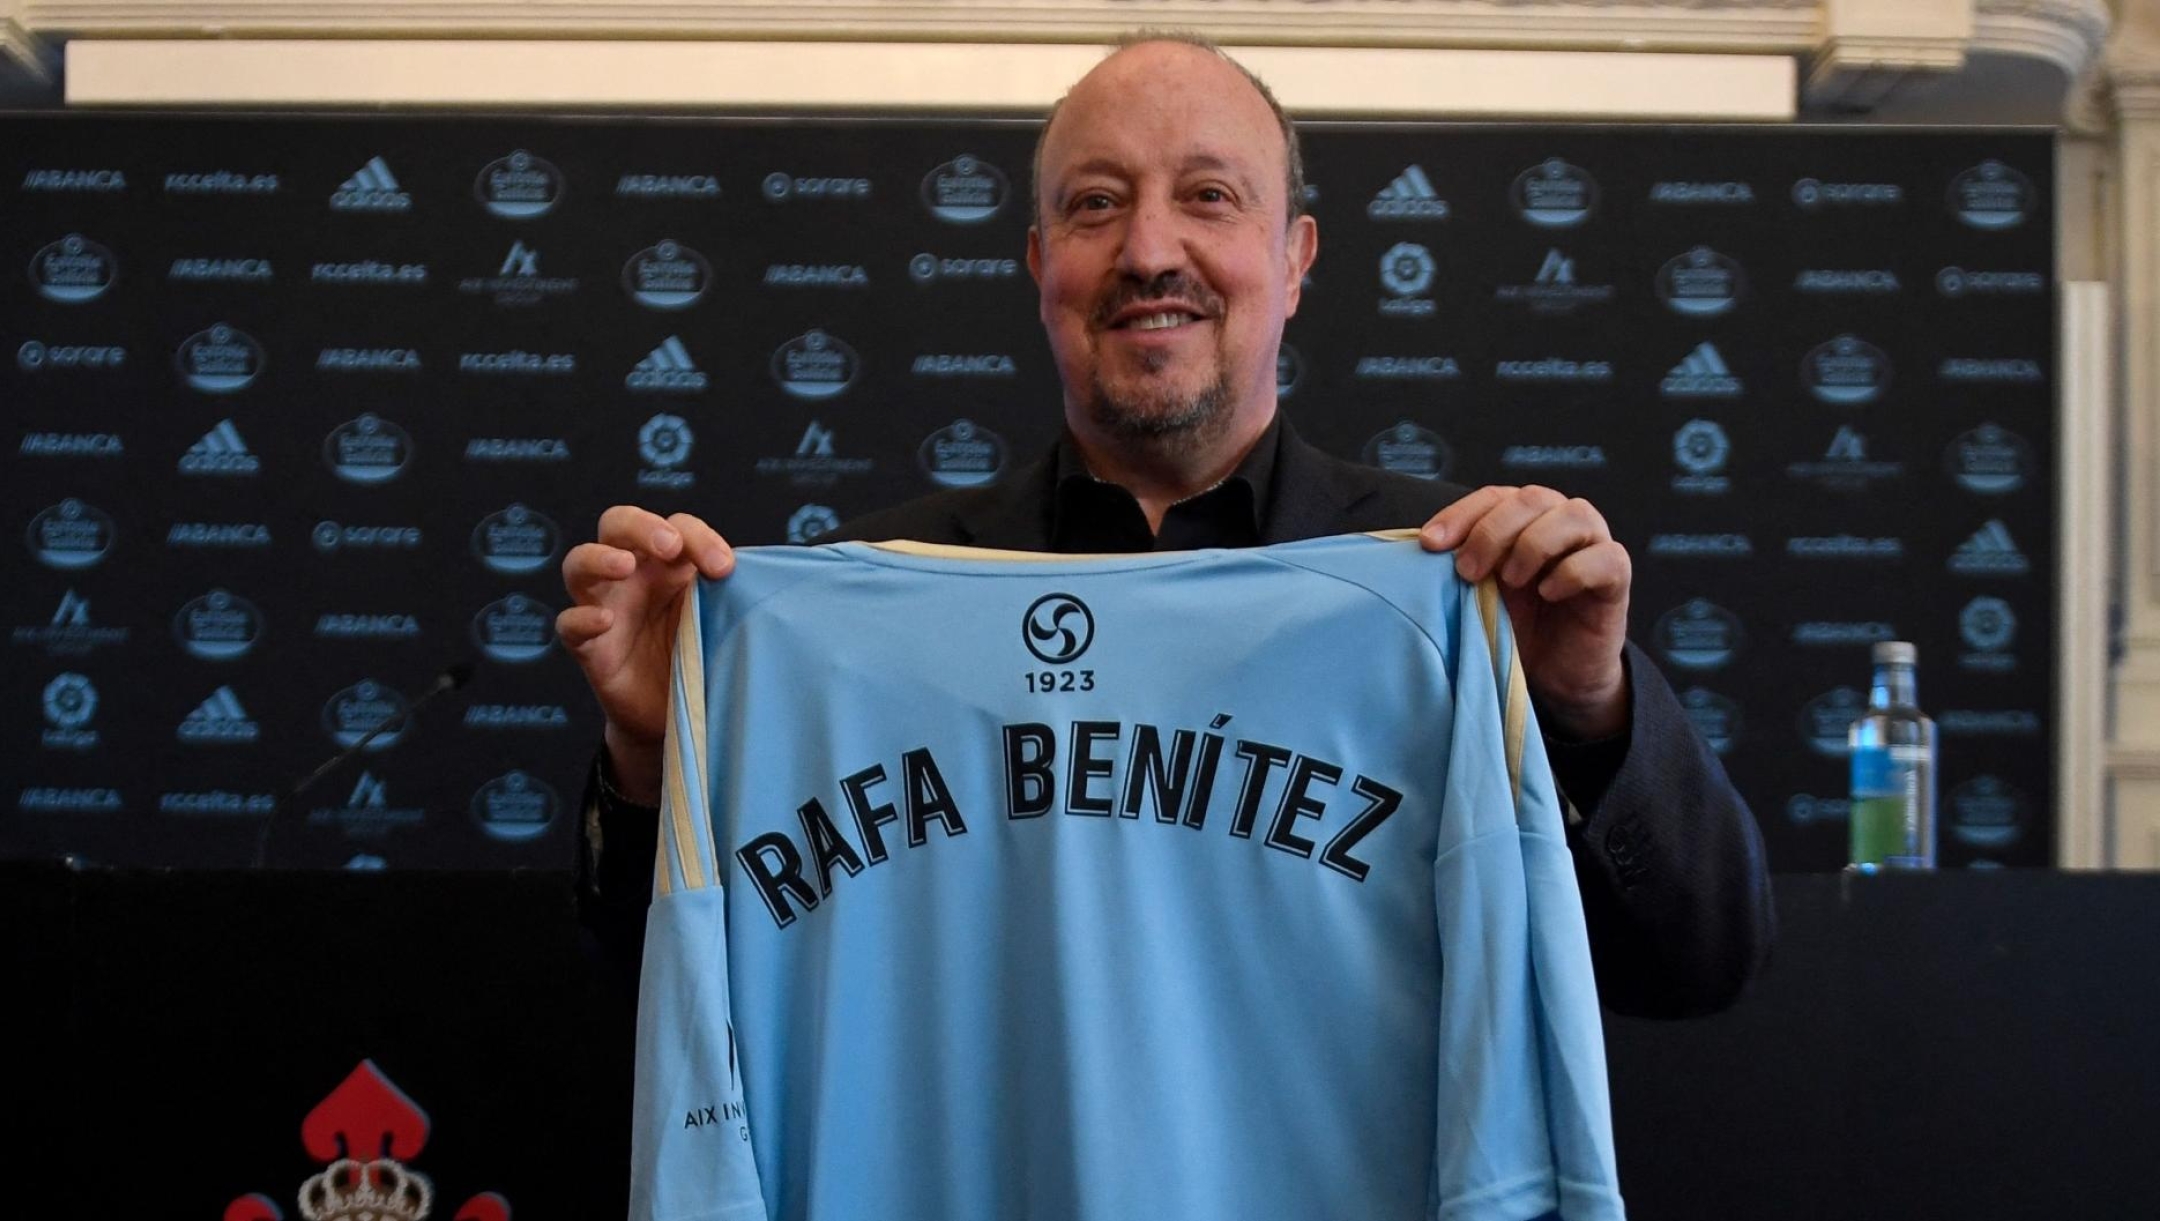 Celta Vigo's newly appointed Spanish head coach Rafa Benitez poses for pictures holding his jersey during a press conference as part of his official presentation, in Vigo on July 3, 2023. (Photo by MIGUEL RIOPA / AFP)